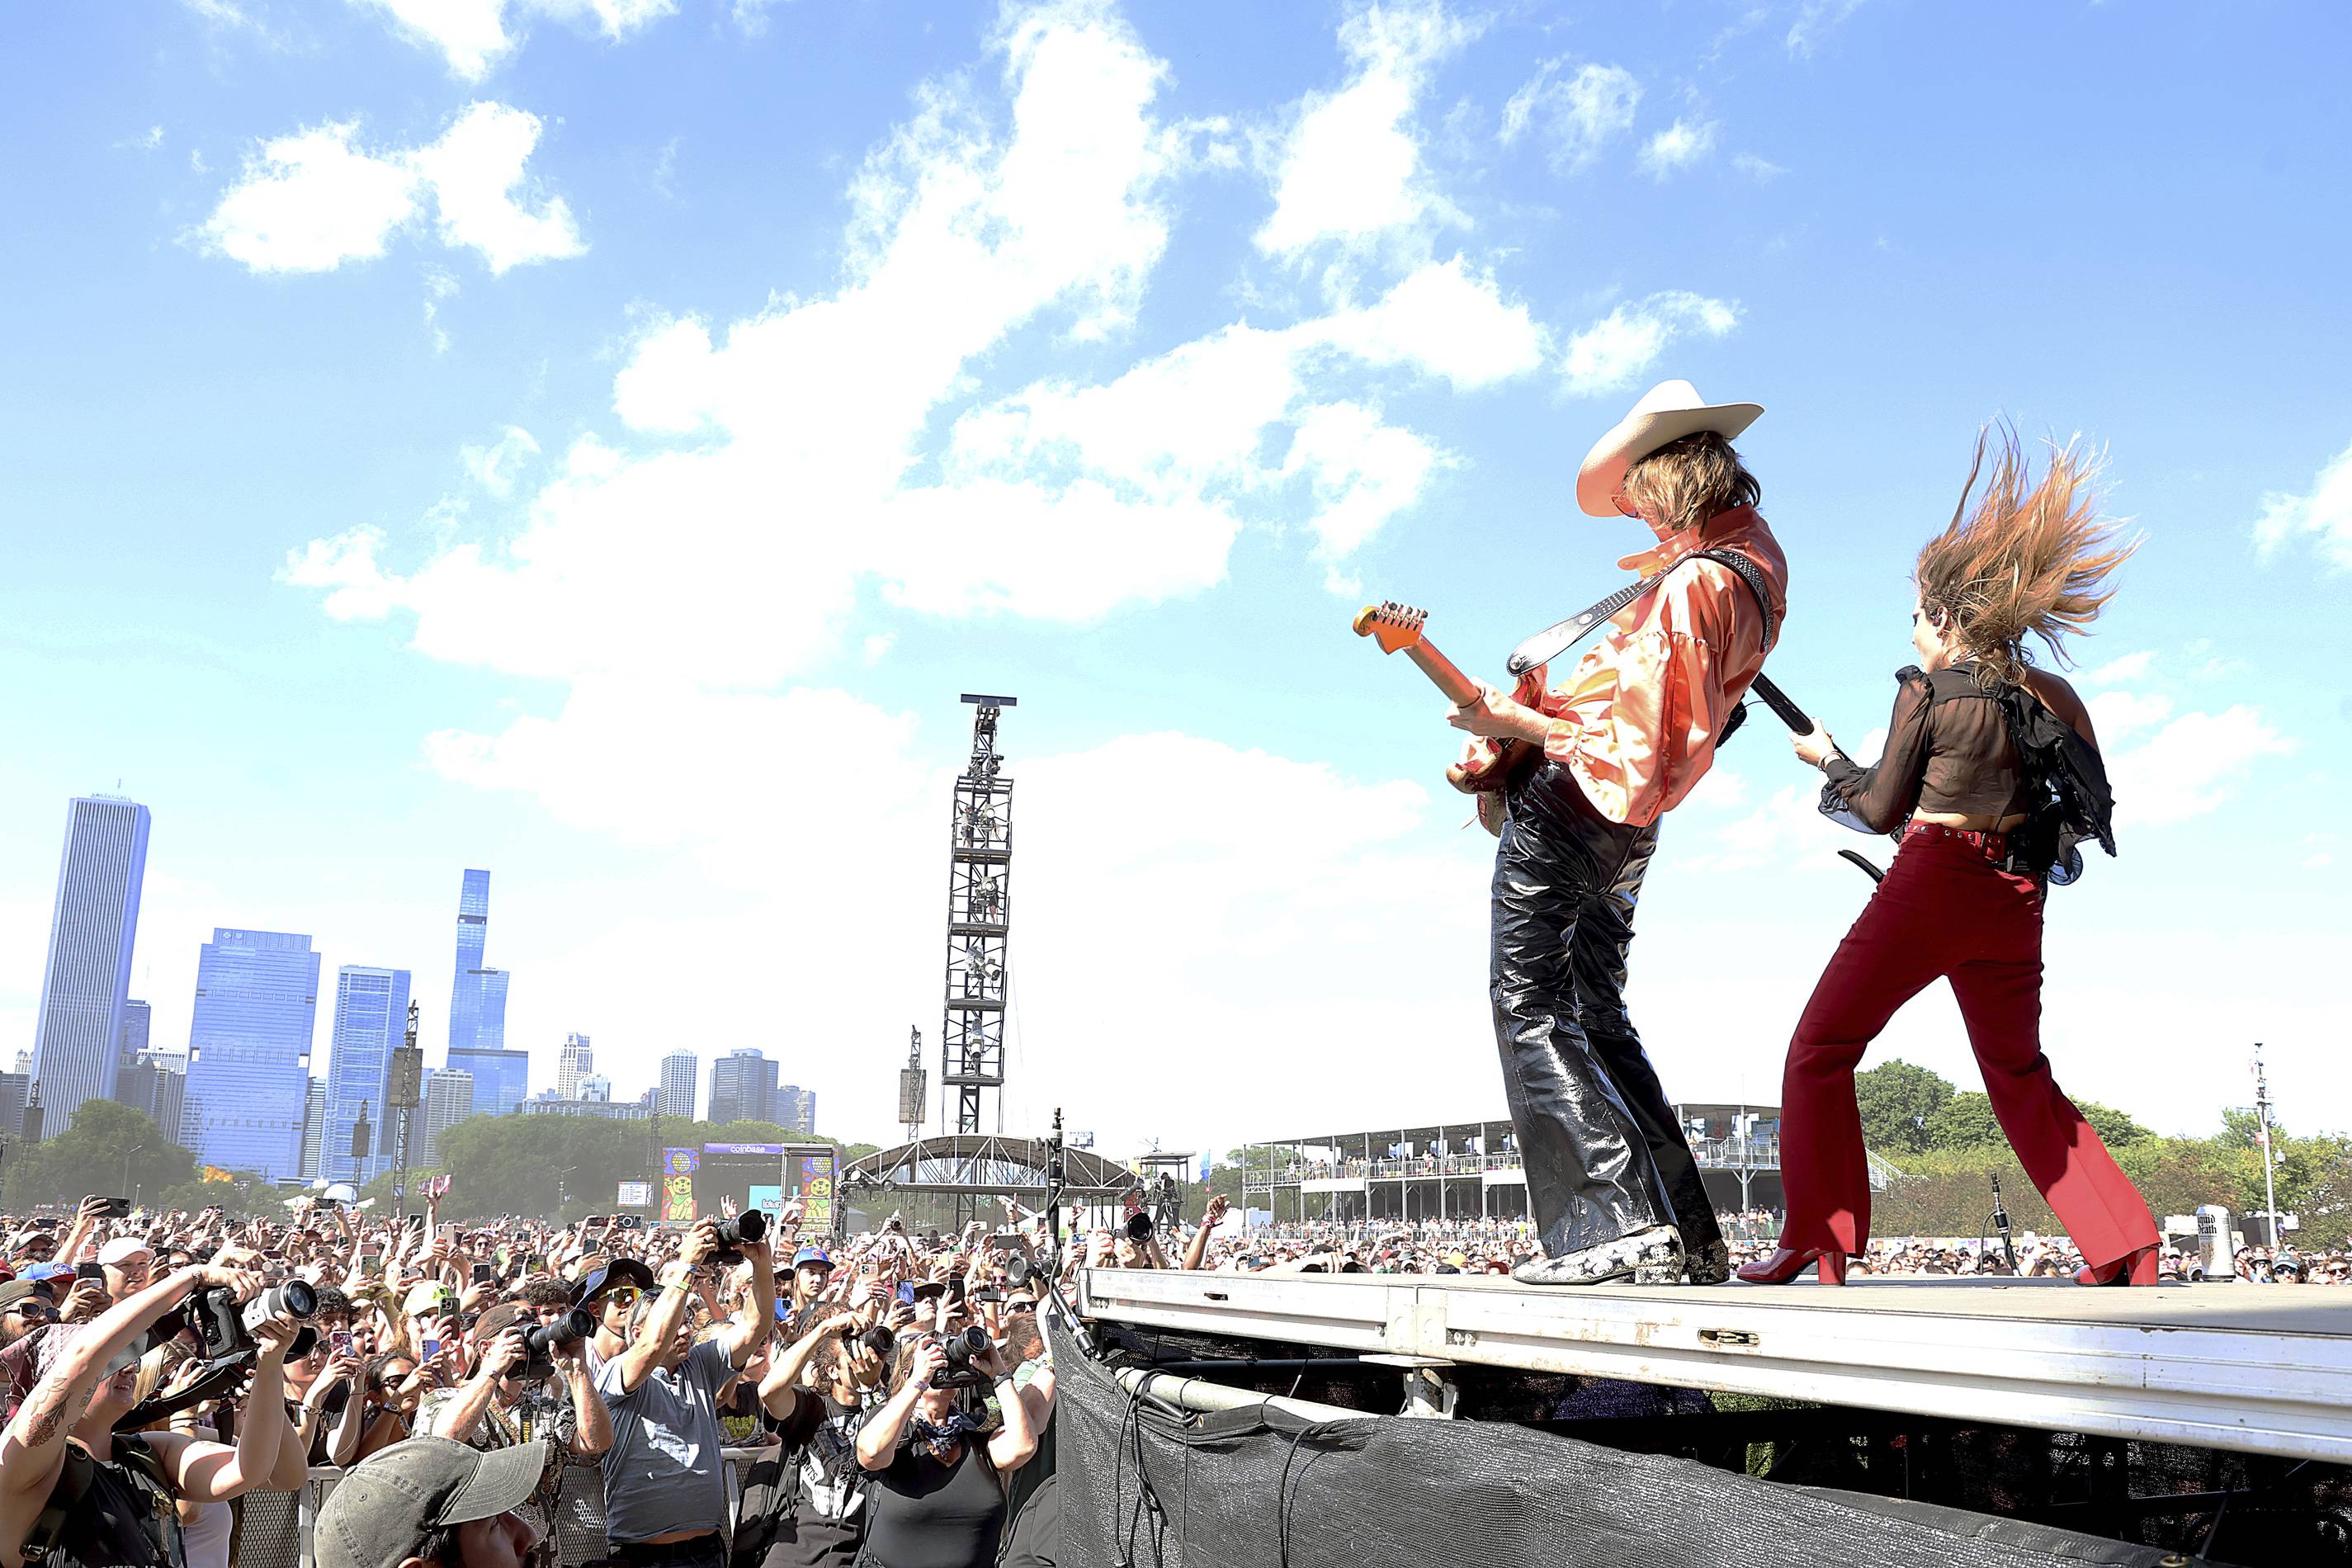 musicians perform on stage at lollapalooza in chicago